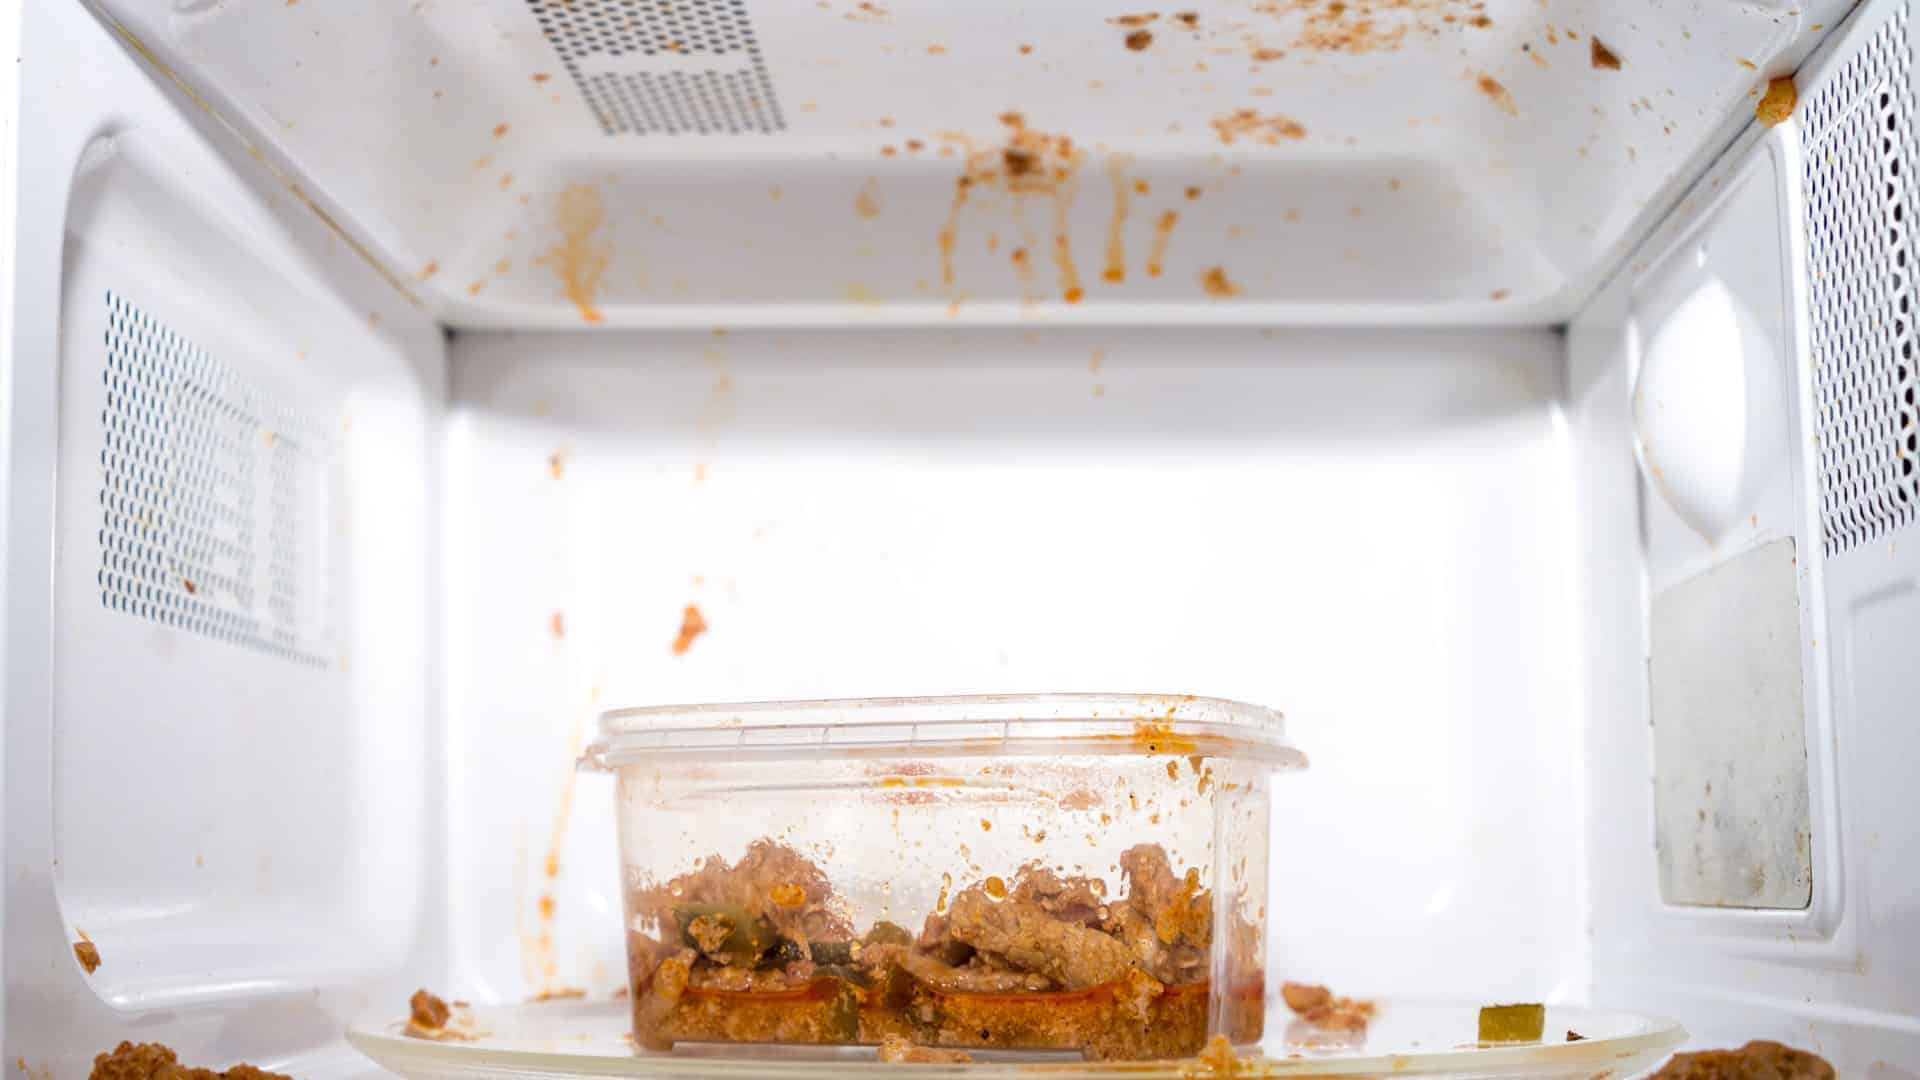 Featured image for “Smelly Microwave? Common Reasons and Solutions”